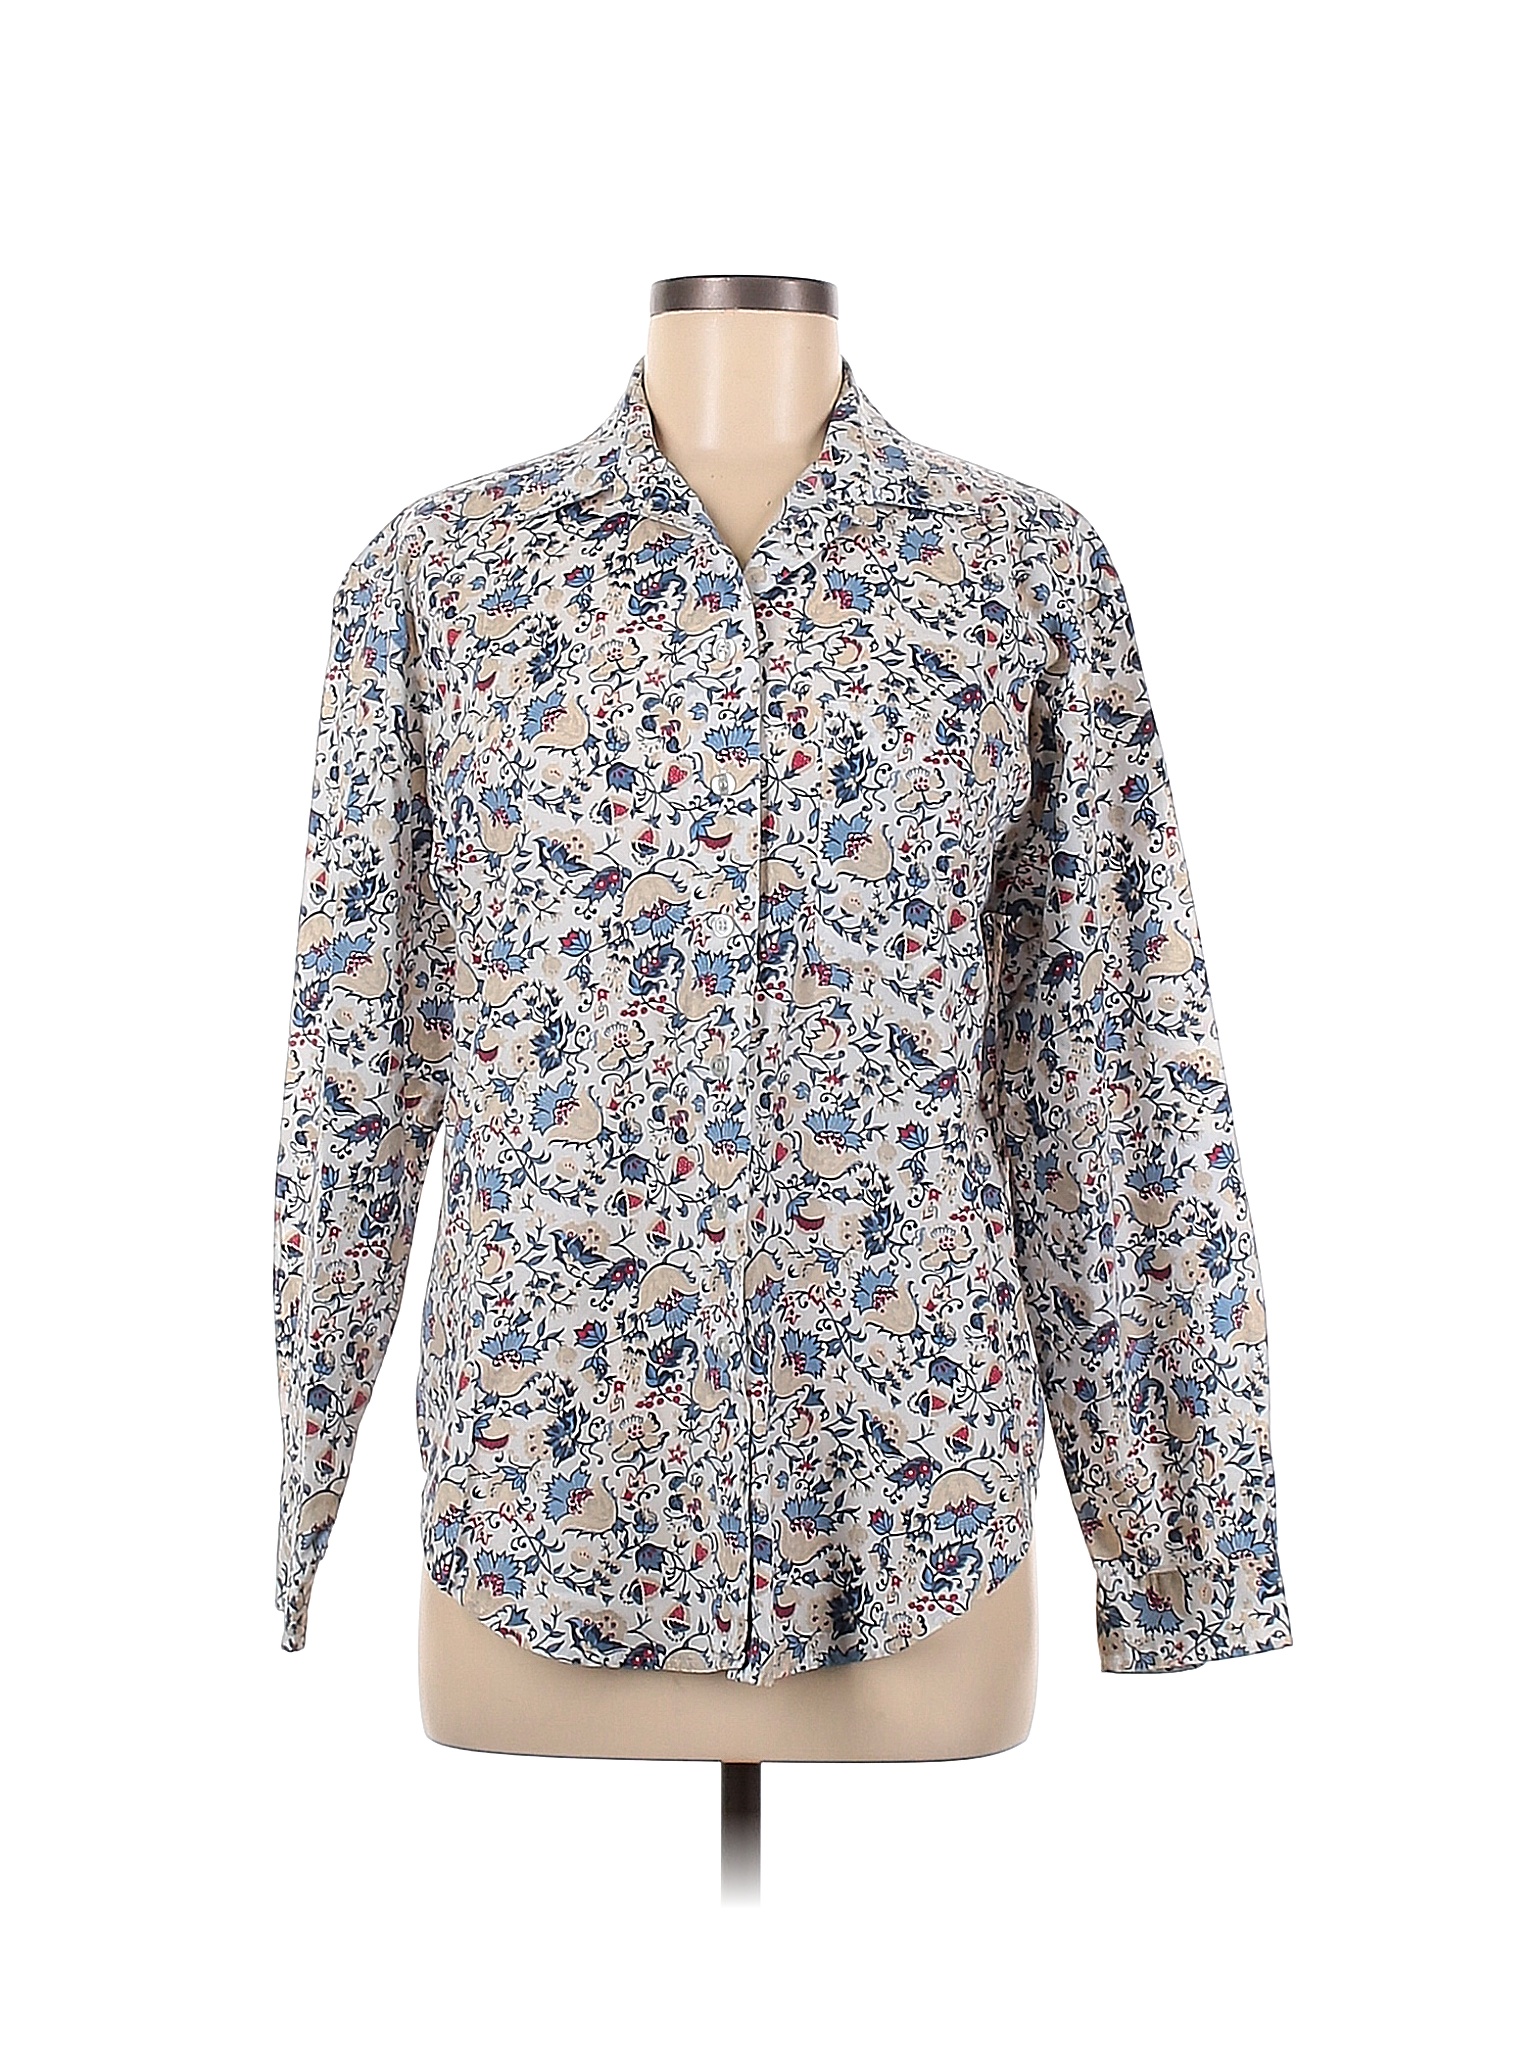 Cabin Creek Floral White Long Sleeve Button-Down Shirt Size M - 45% off ...